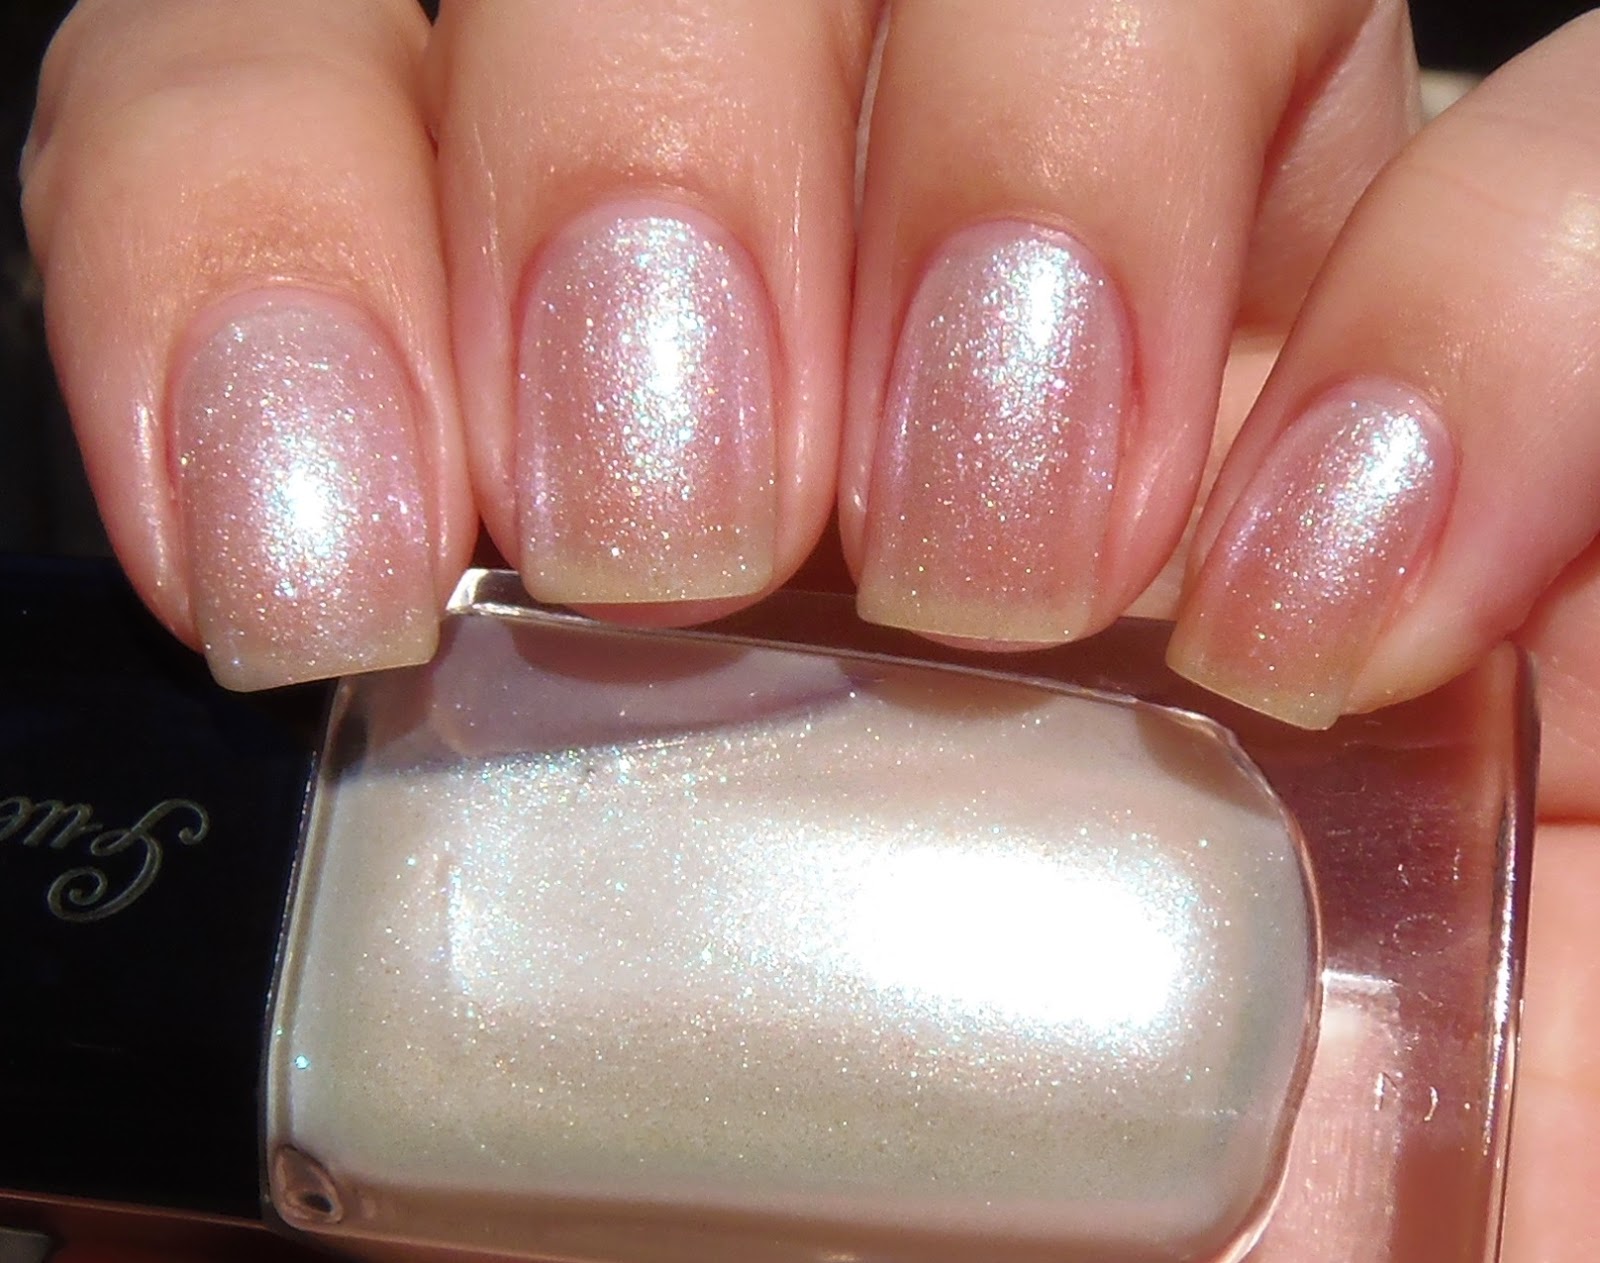 Sparkly Vernis: Guerlain 862 is a shimmery white with an ethereal quality